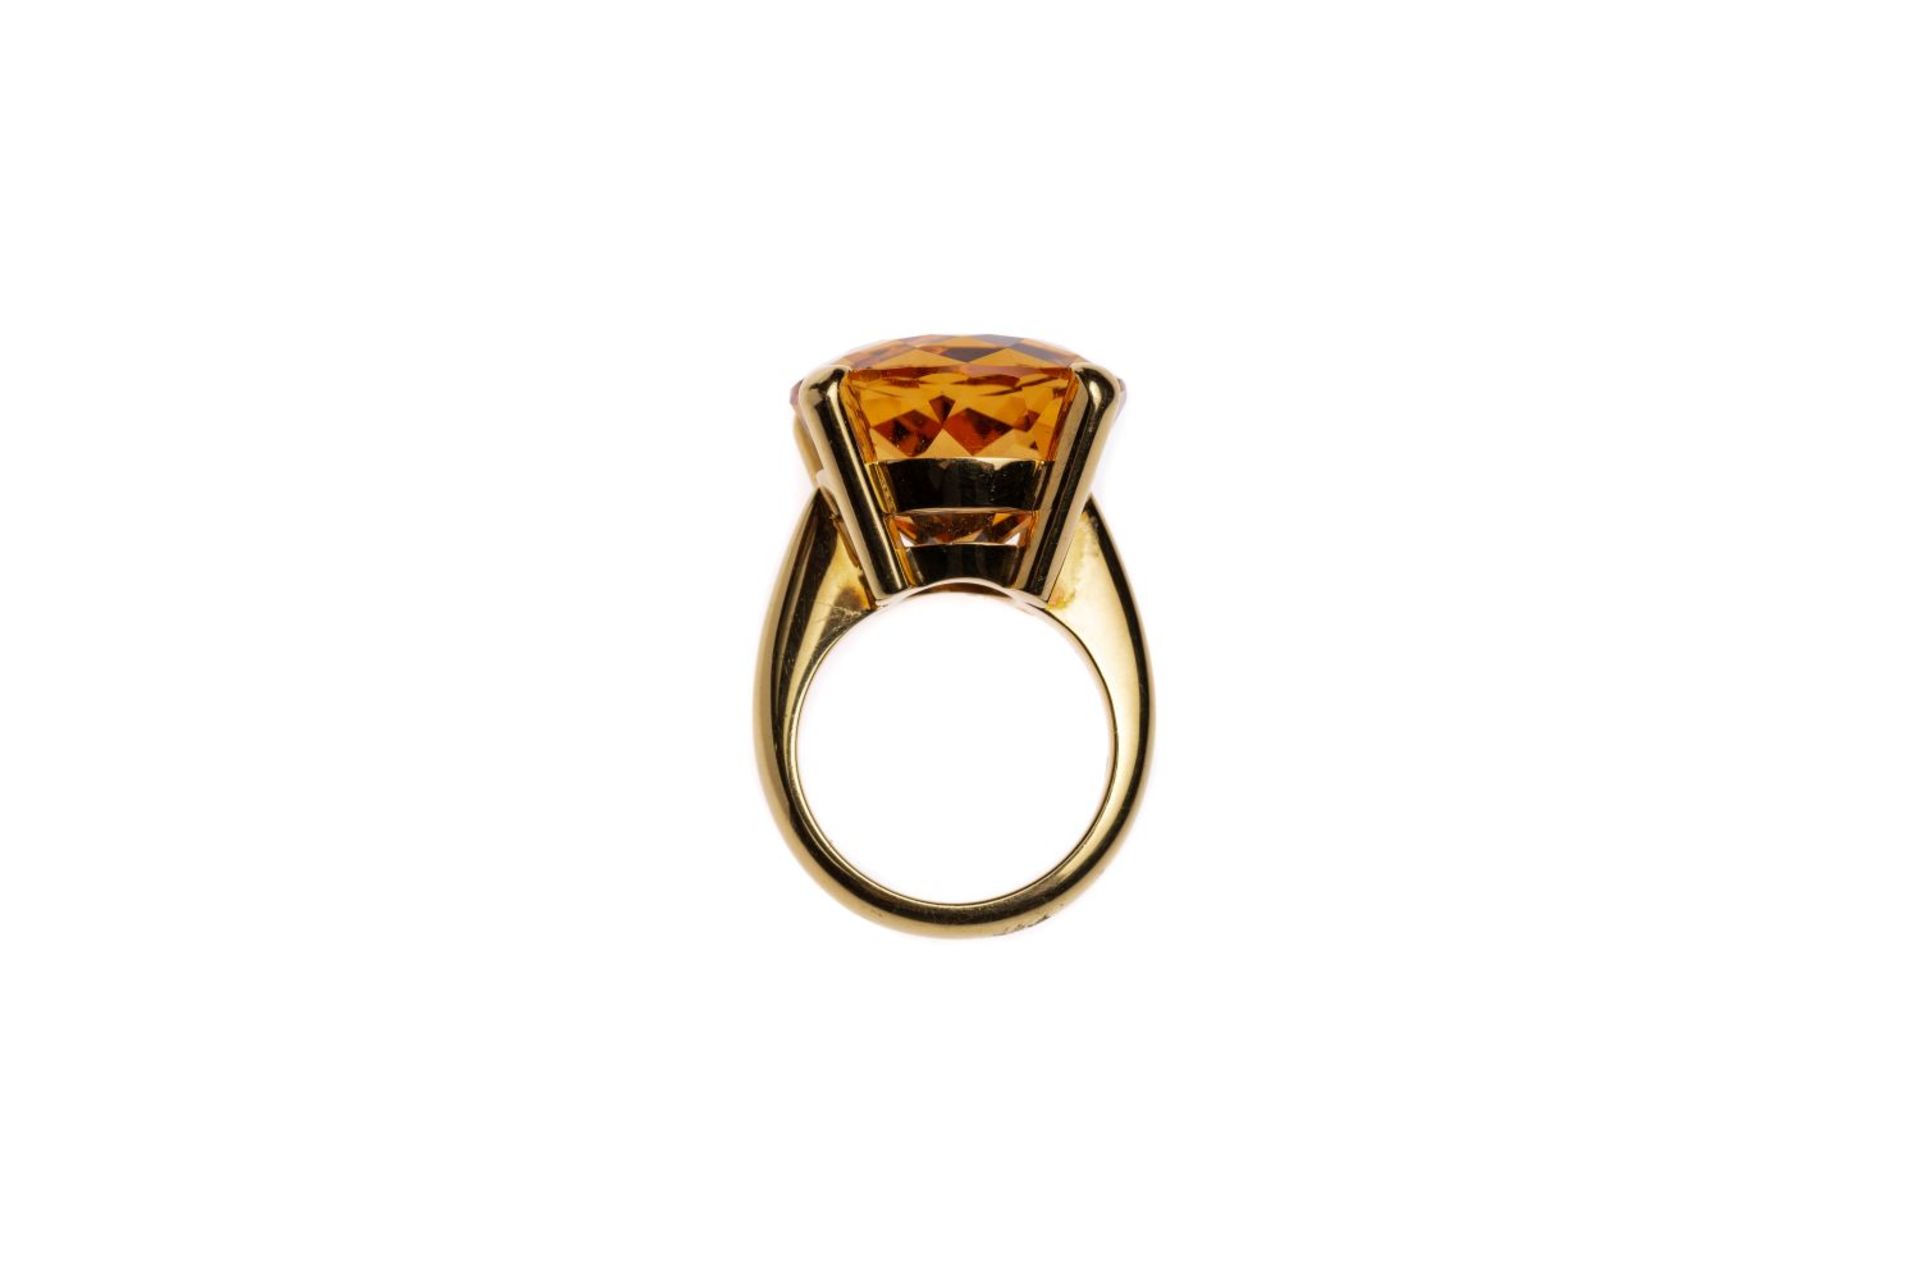 Cocktail ring18kt gold ring with a citrin approx. 19 ct, total weight 22 g, size 54